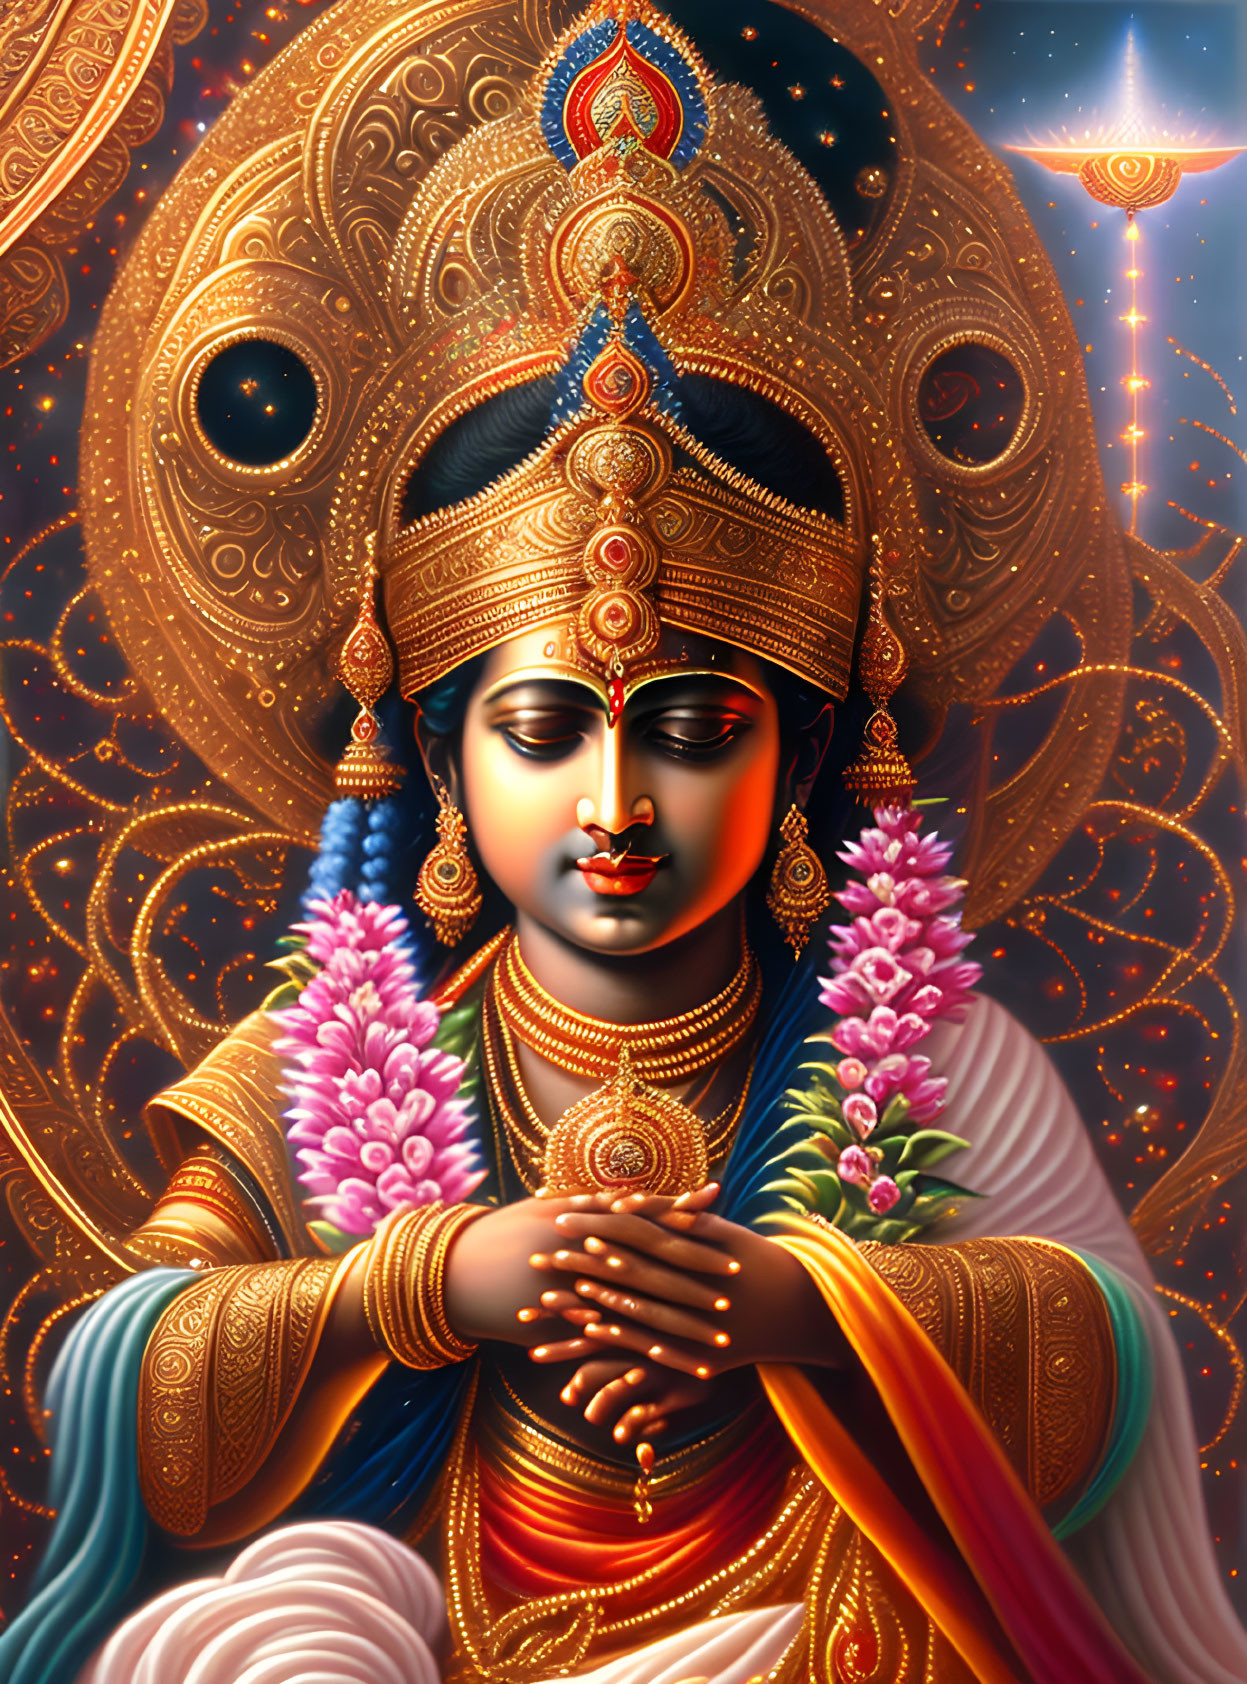 Illustration of Hindu goddess with multiple arms and ornate gold headgear in cosmic backdrop